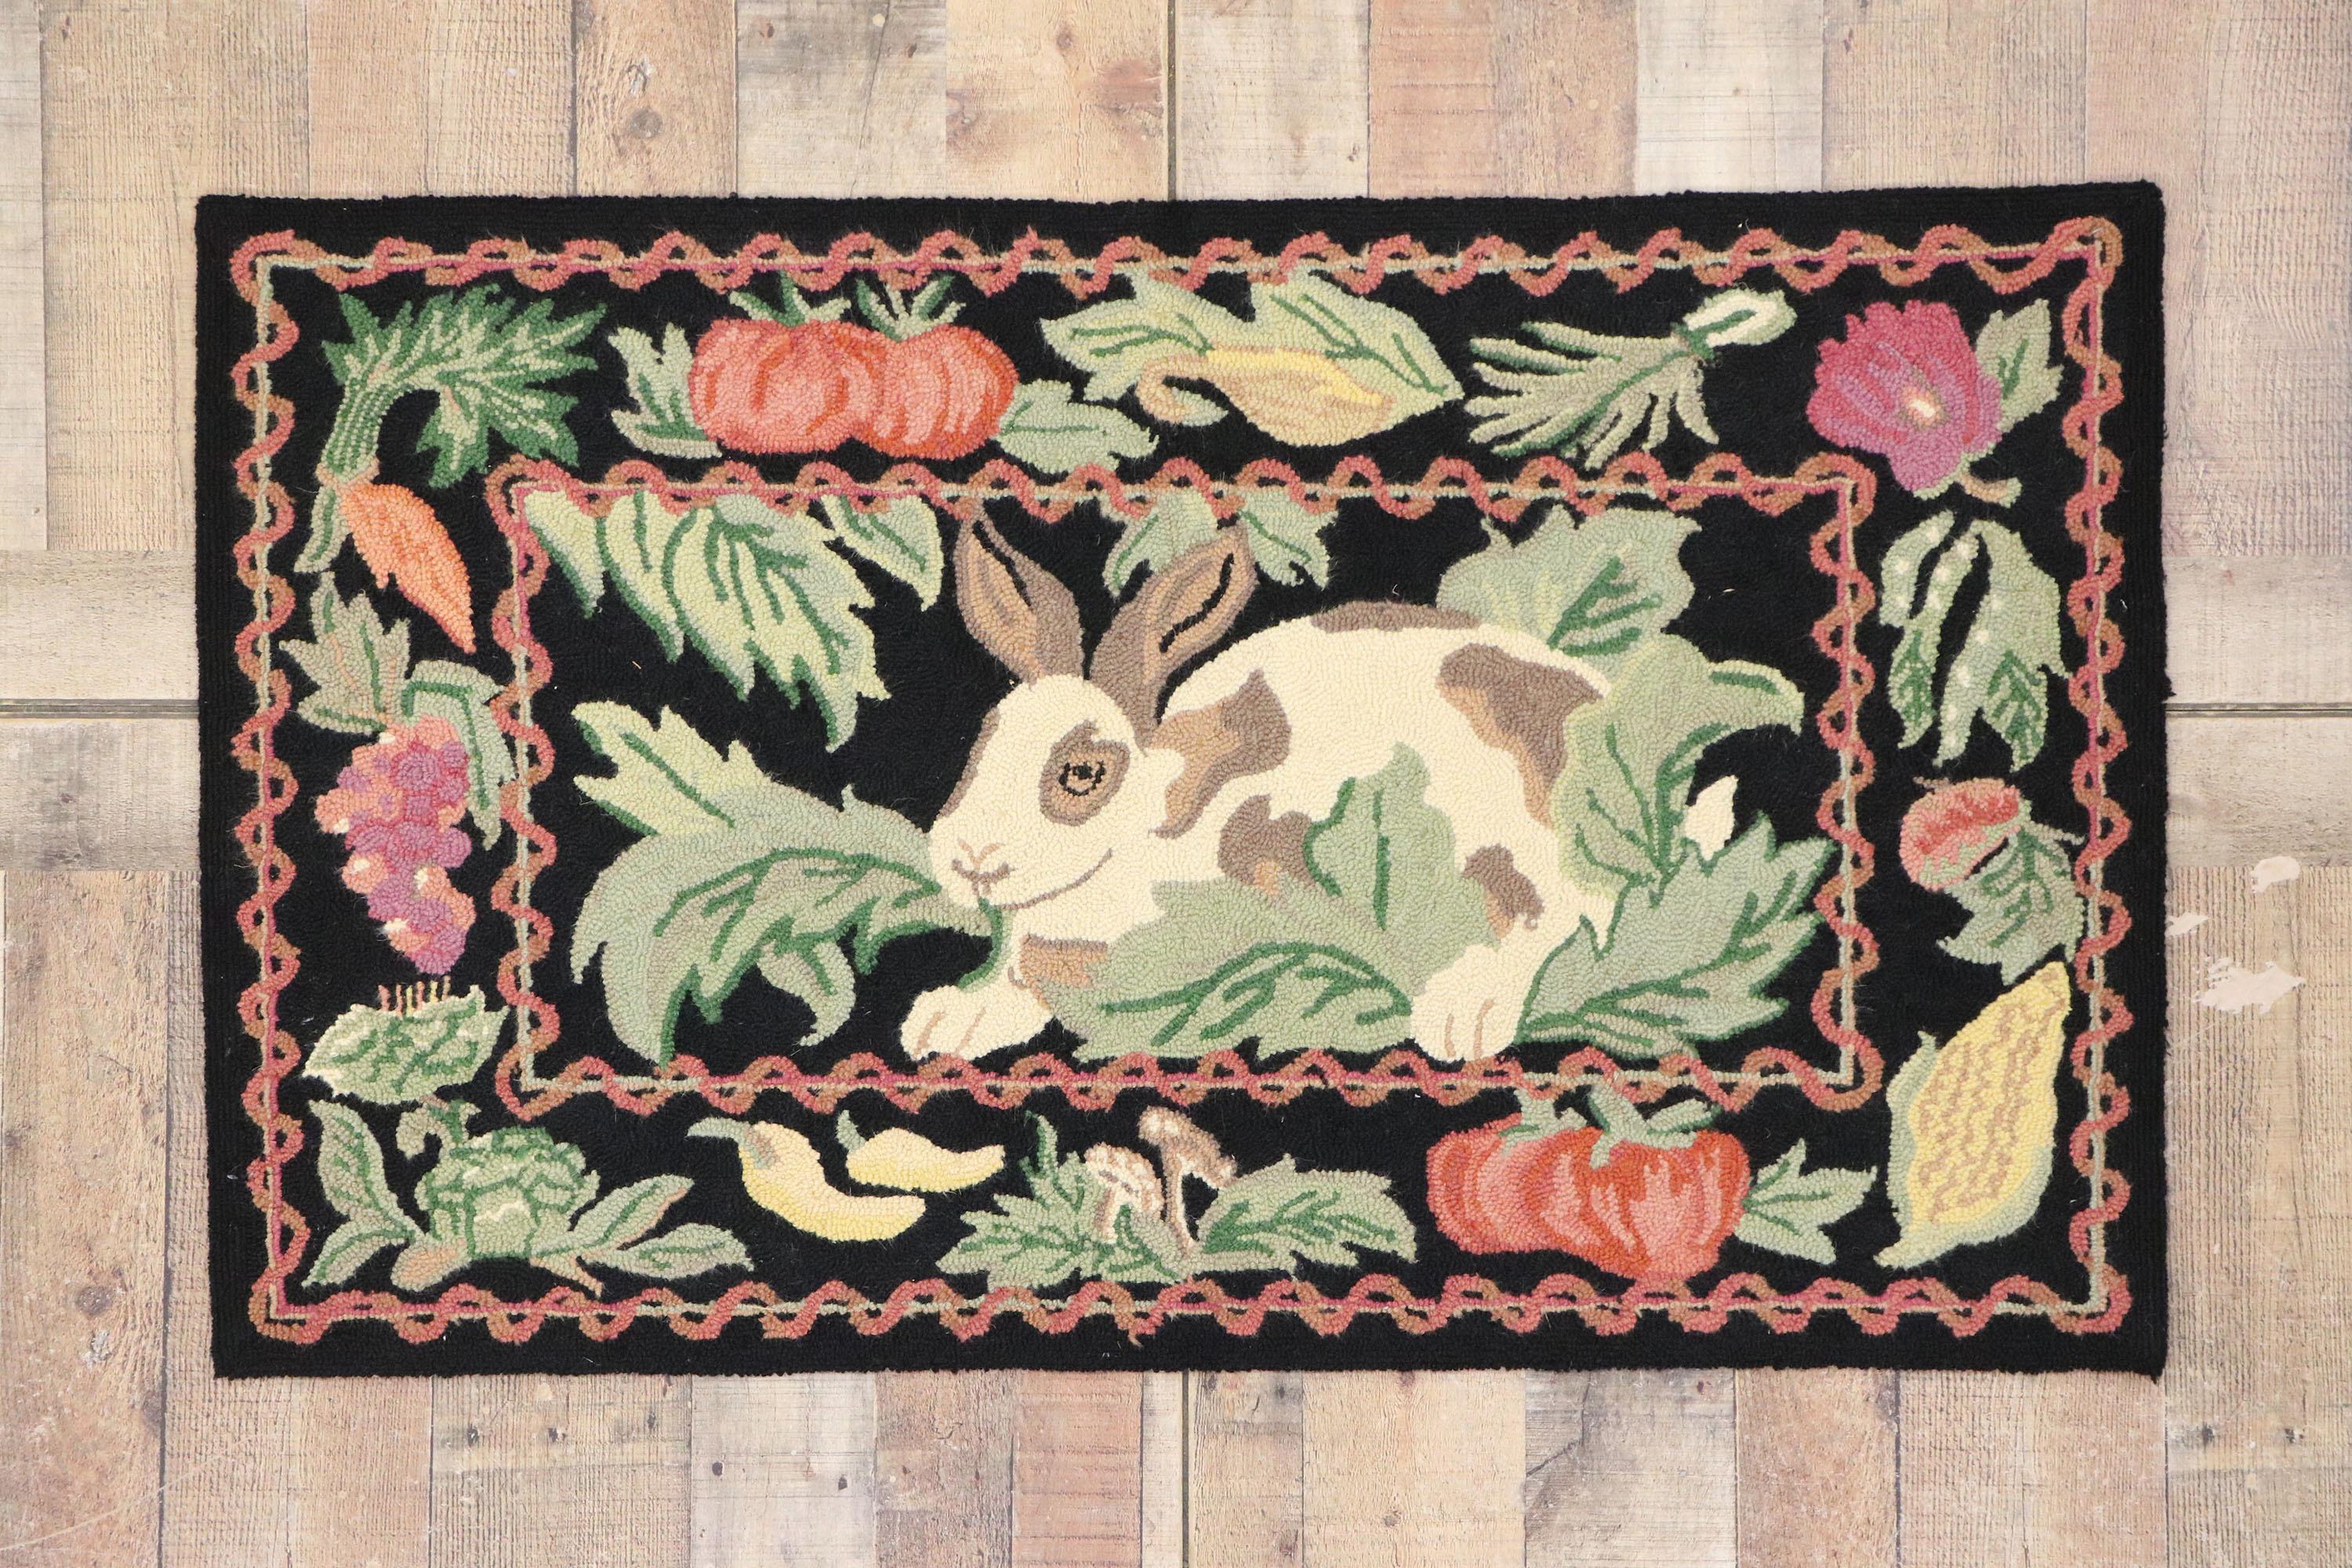 Hand-Crafted Vintage Garden Rabbit Hooked Rug with French Country Cottage Style For Sale